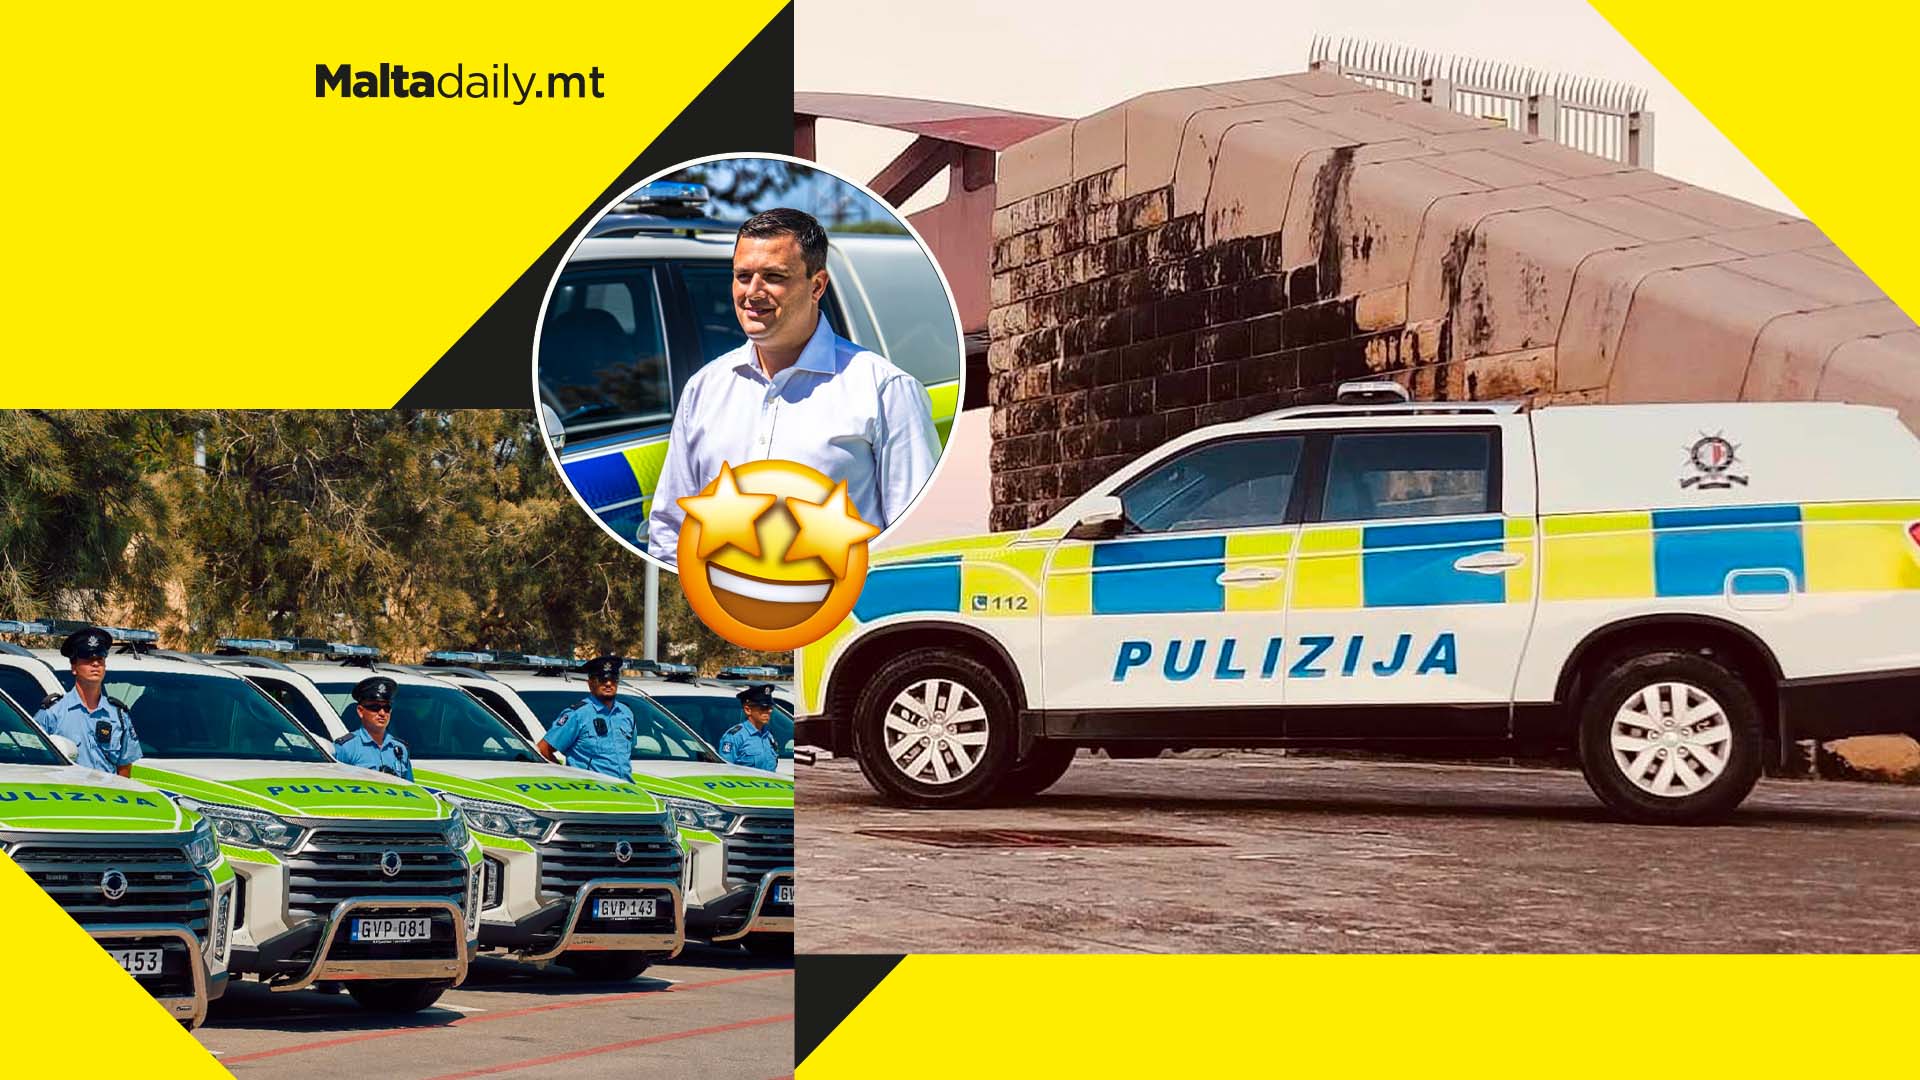 12 brand new off-road vehicles for Malta’s Police Force